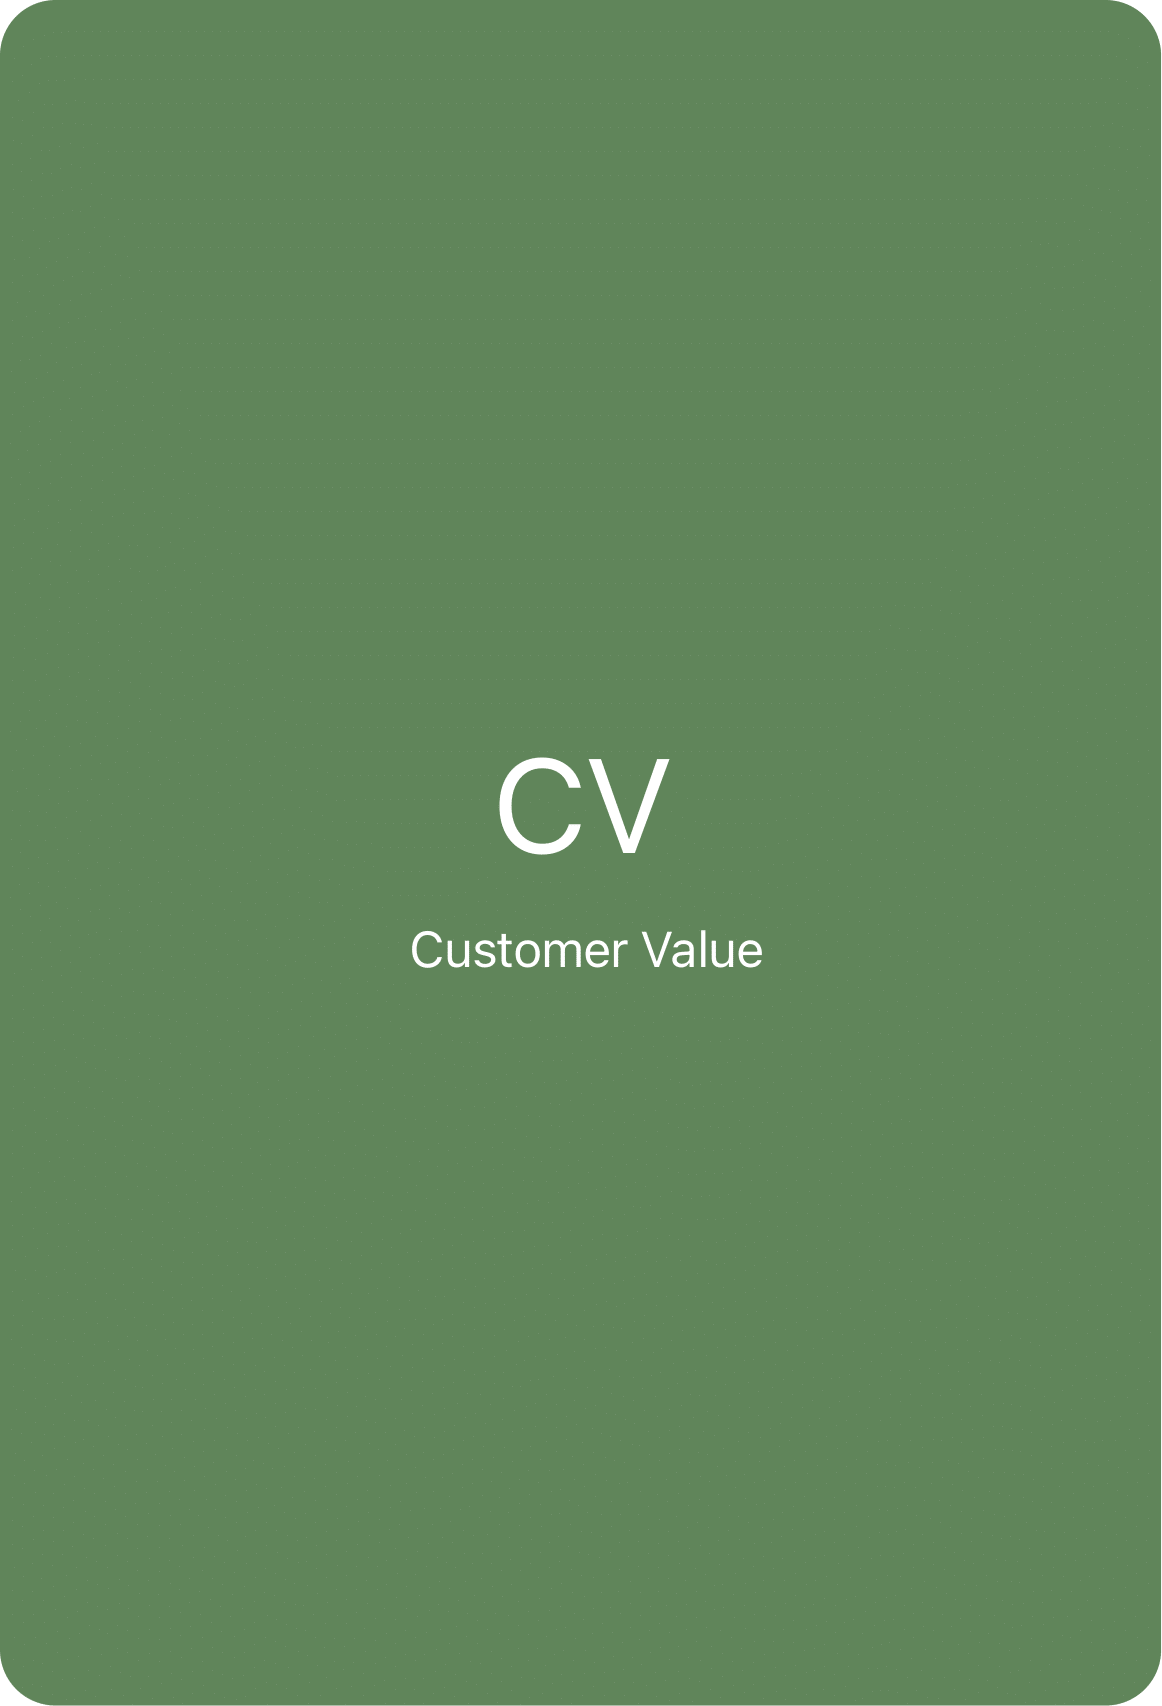 About us_our key people_cv-1